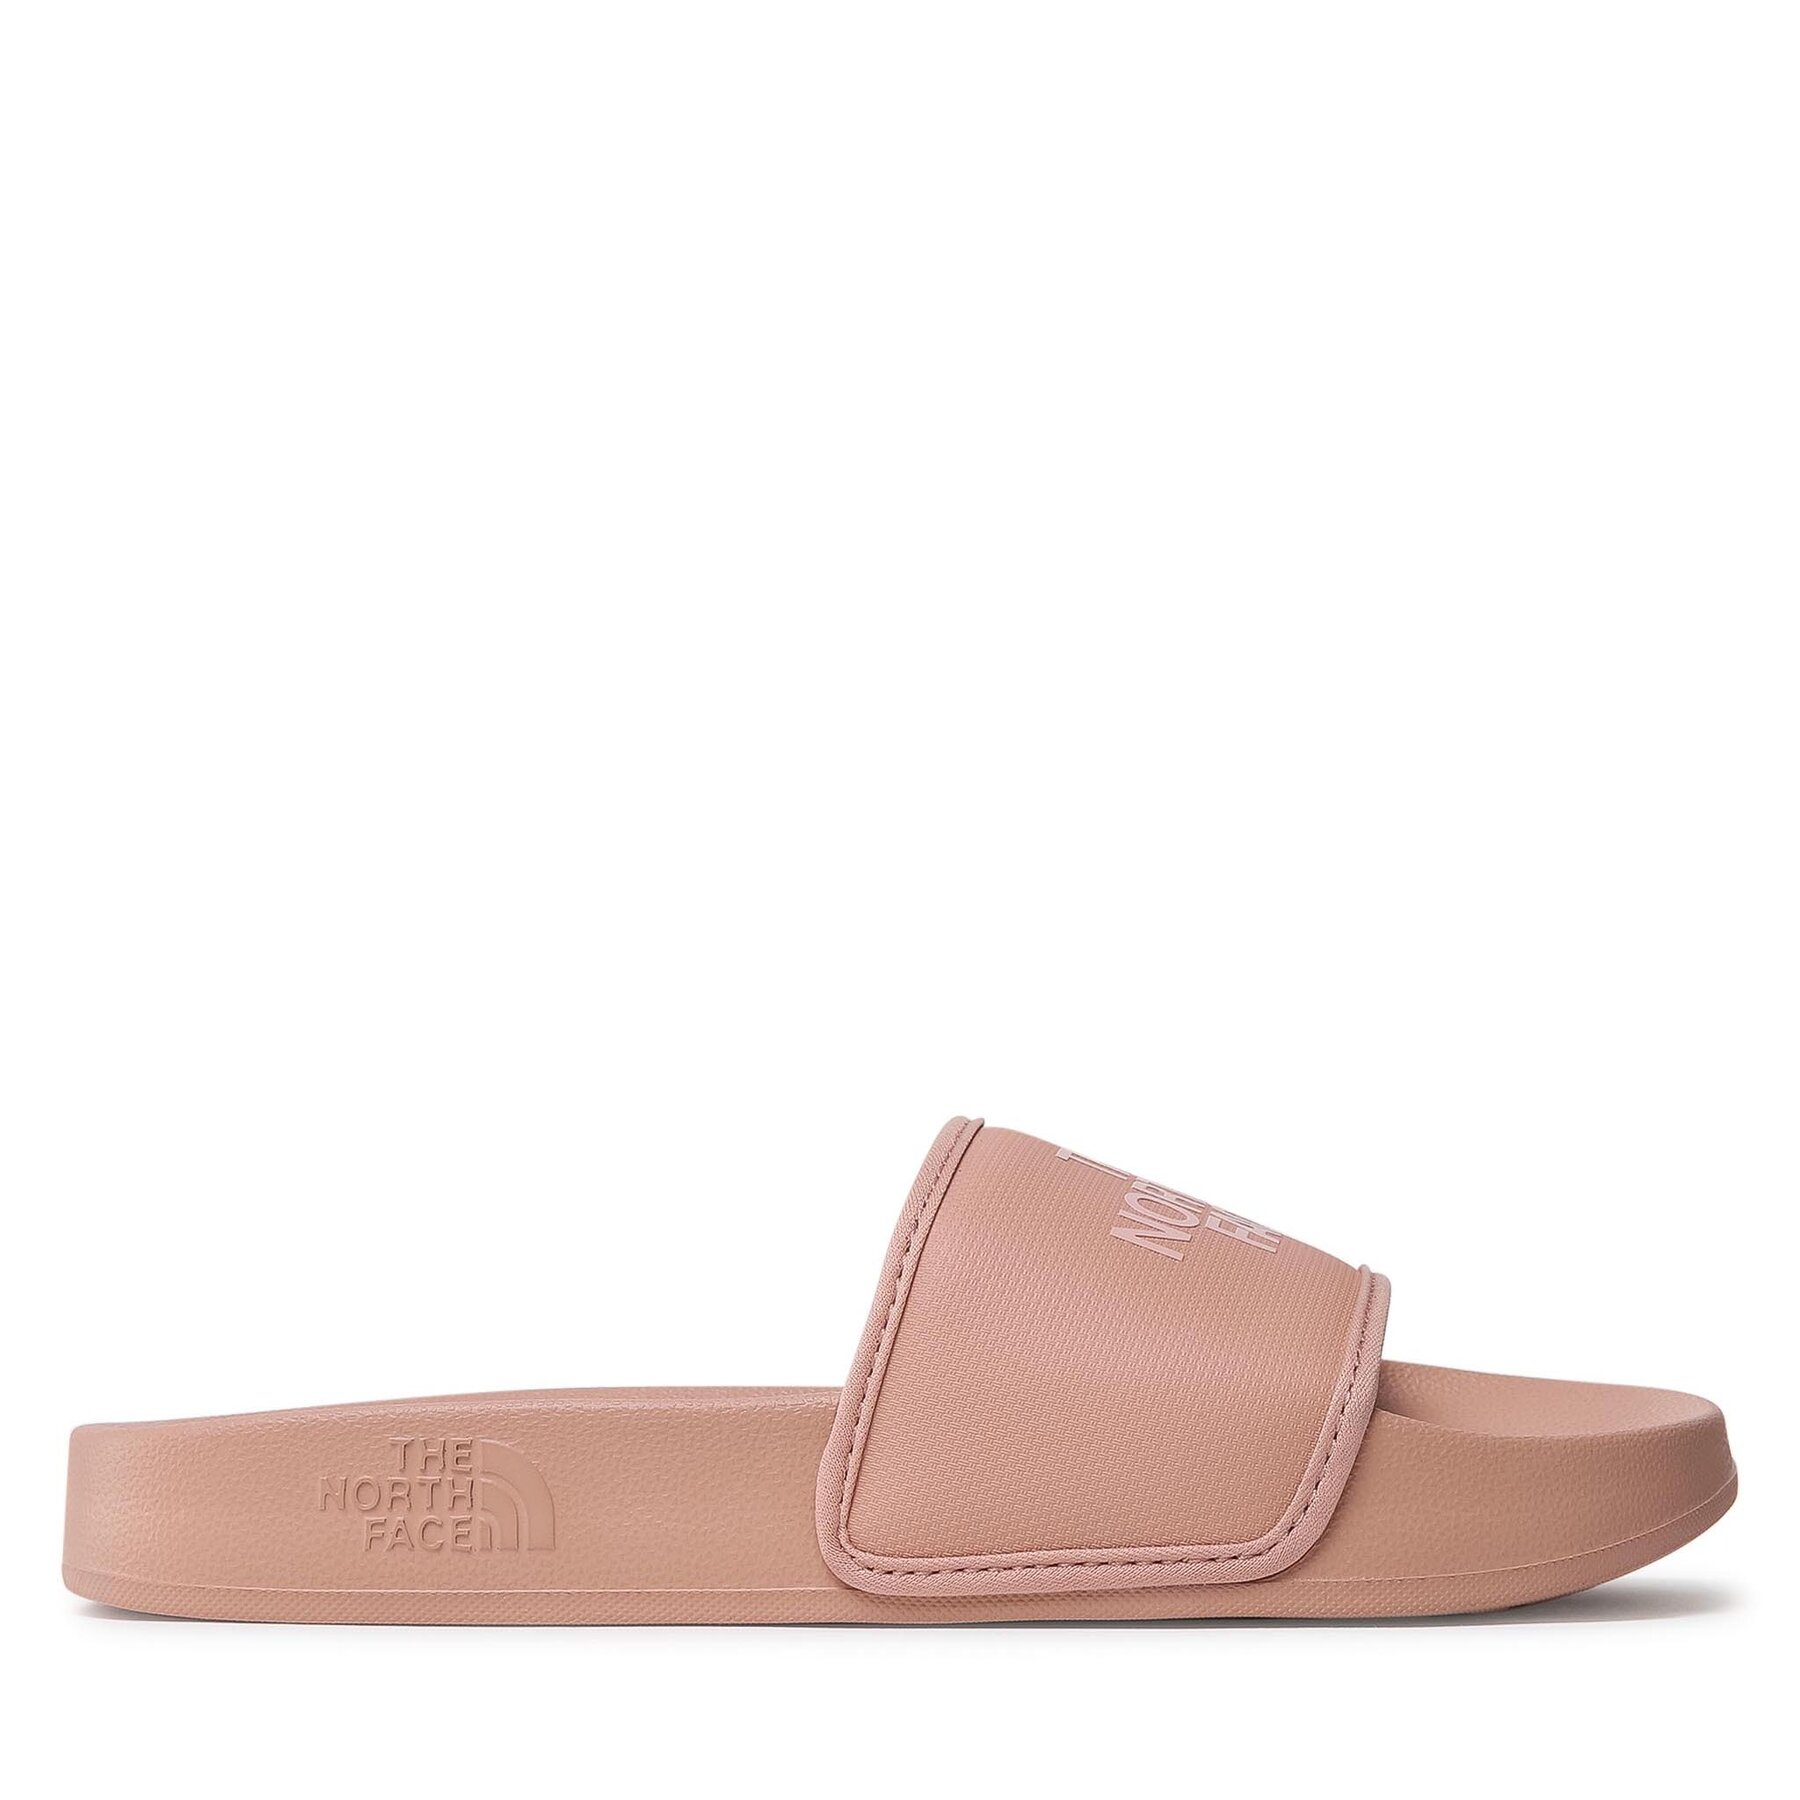 Pantoletten The North Face Base Camp Slide III NF0A4T2SZ1P1 Cafe Creame/Evening Sand Pink von The North Face